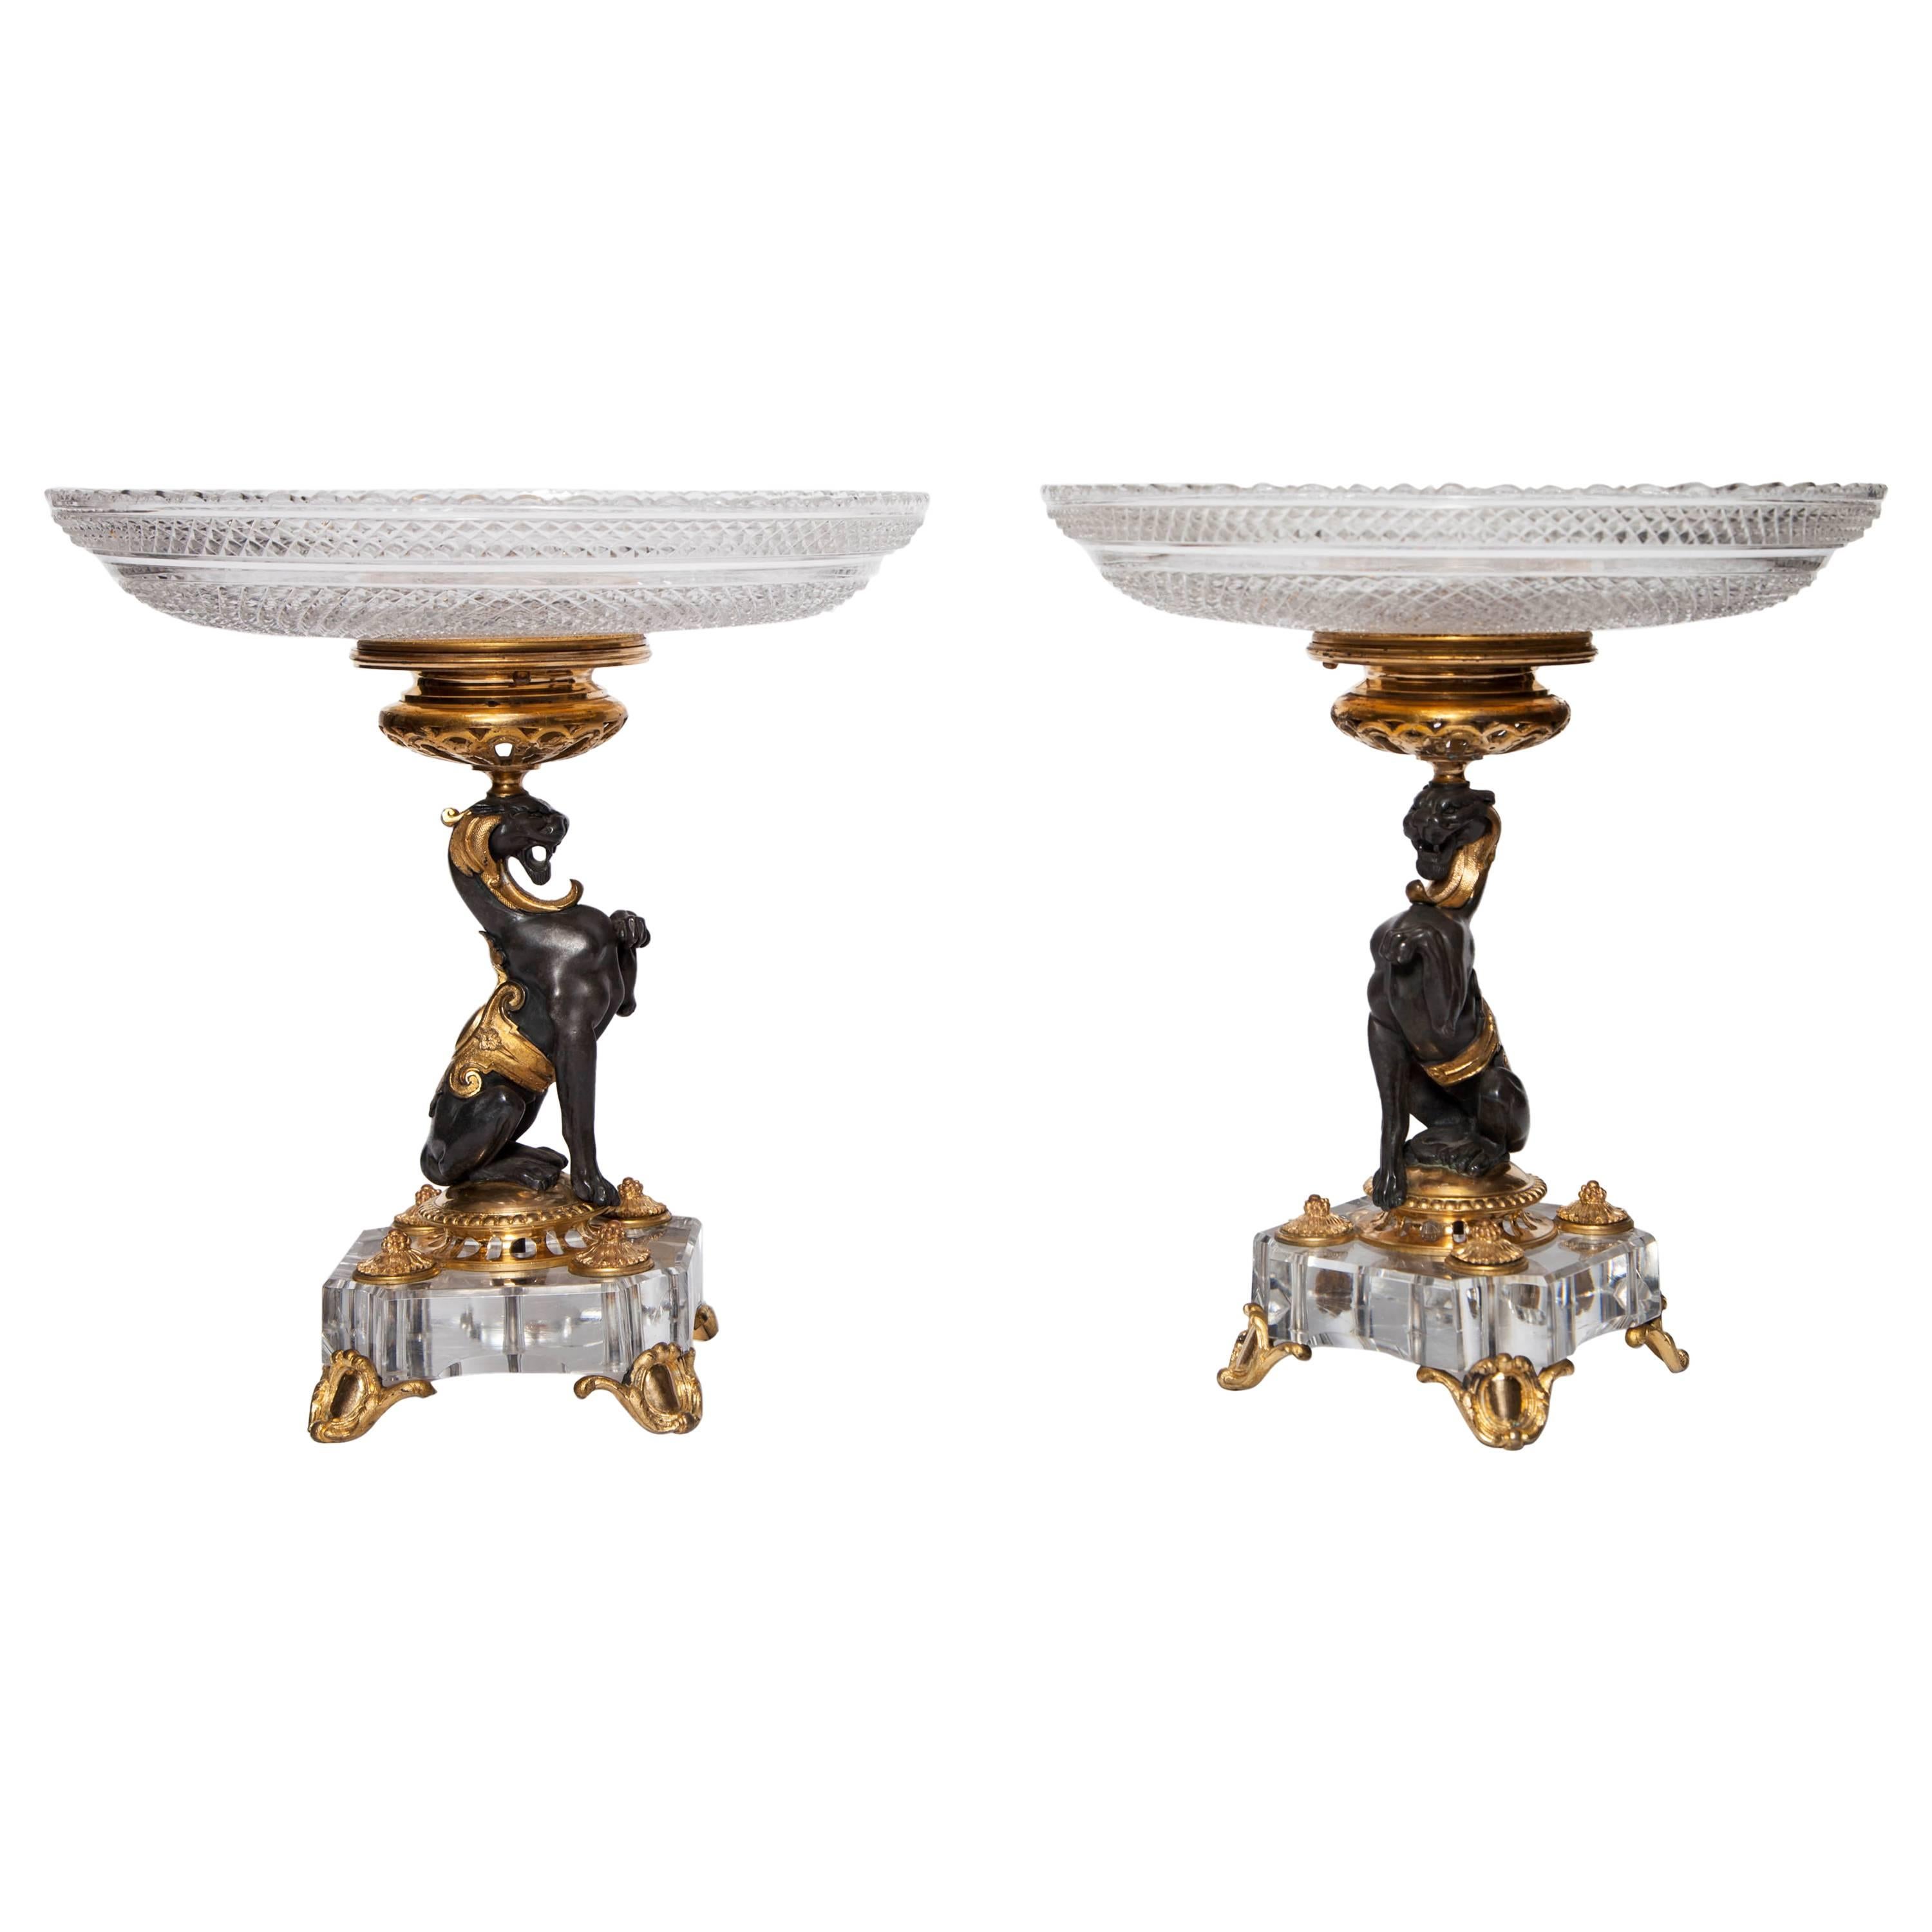 Exceptional Pair of Antique French Baccarat Crystal and Doré Bronze Compotes